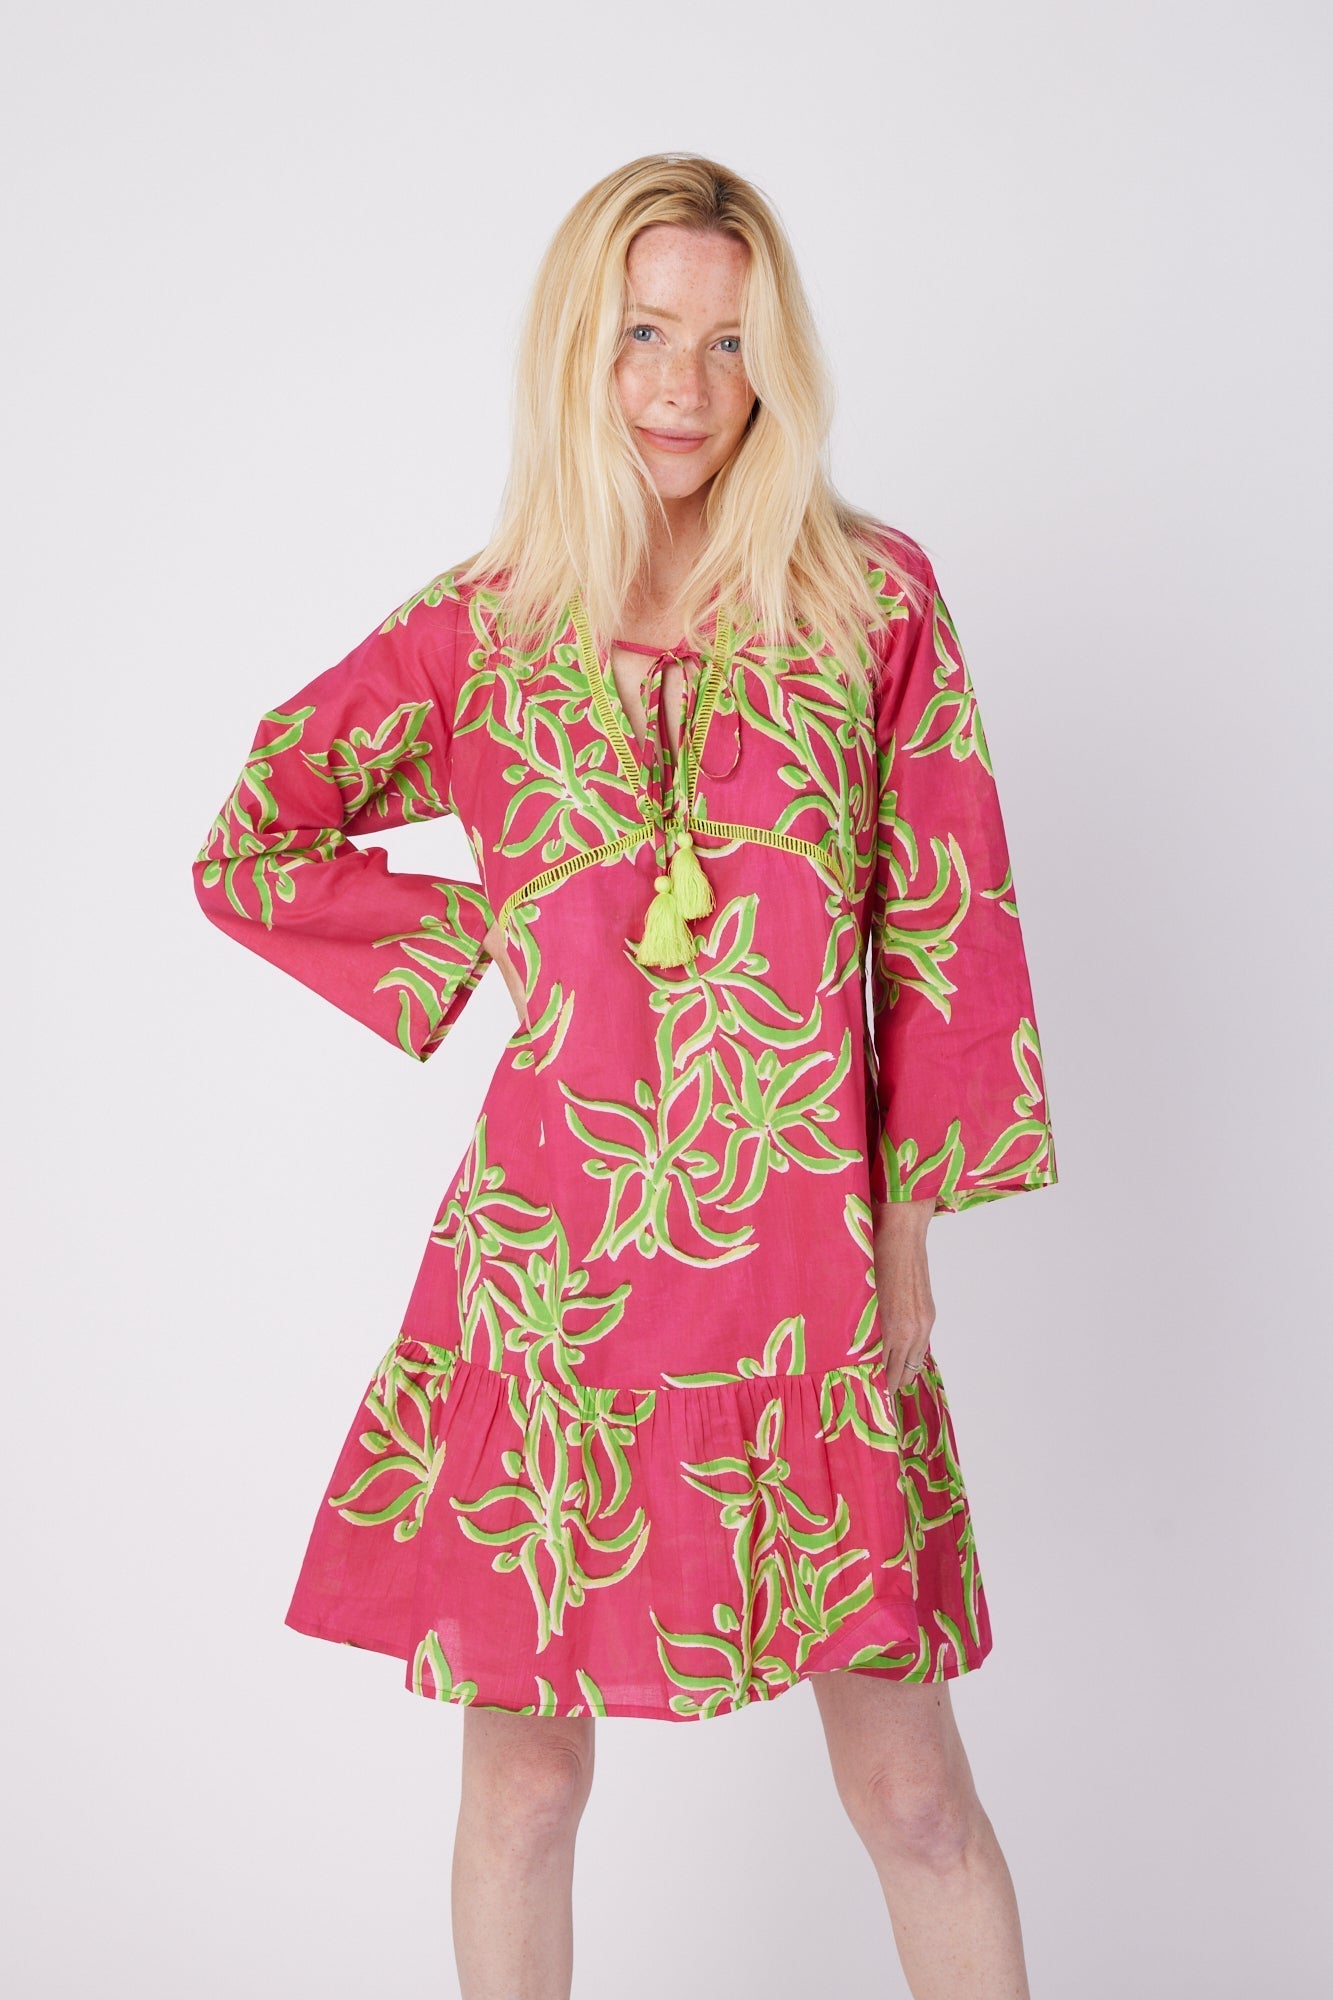 ModaPosa Brigida 3/4 Sleeve Ruffle Knee Length V-Neck Dress in Raspberry Lime Flower . Discover women's resort dresses and lifestyle clothing inspired by the Mediterranean. Free worldwide shipping available!